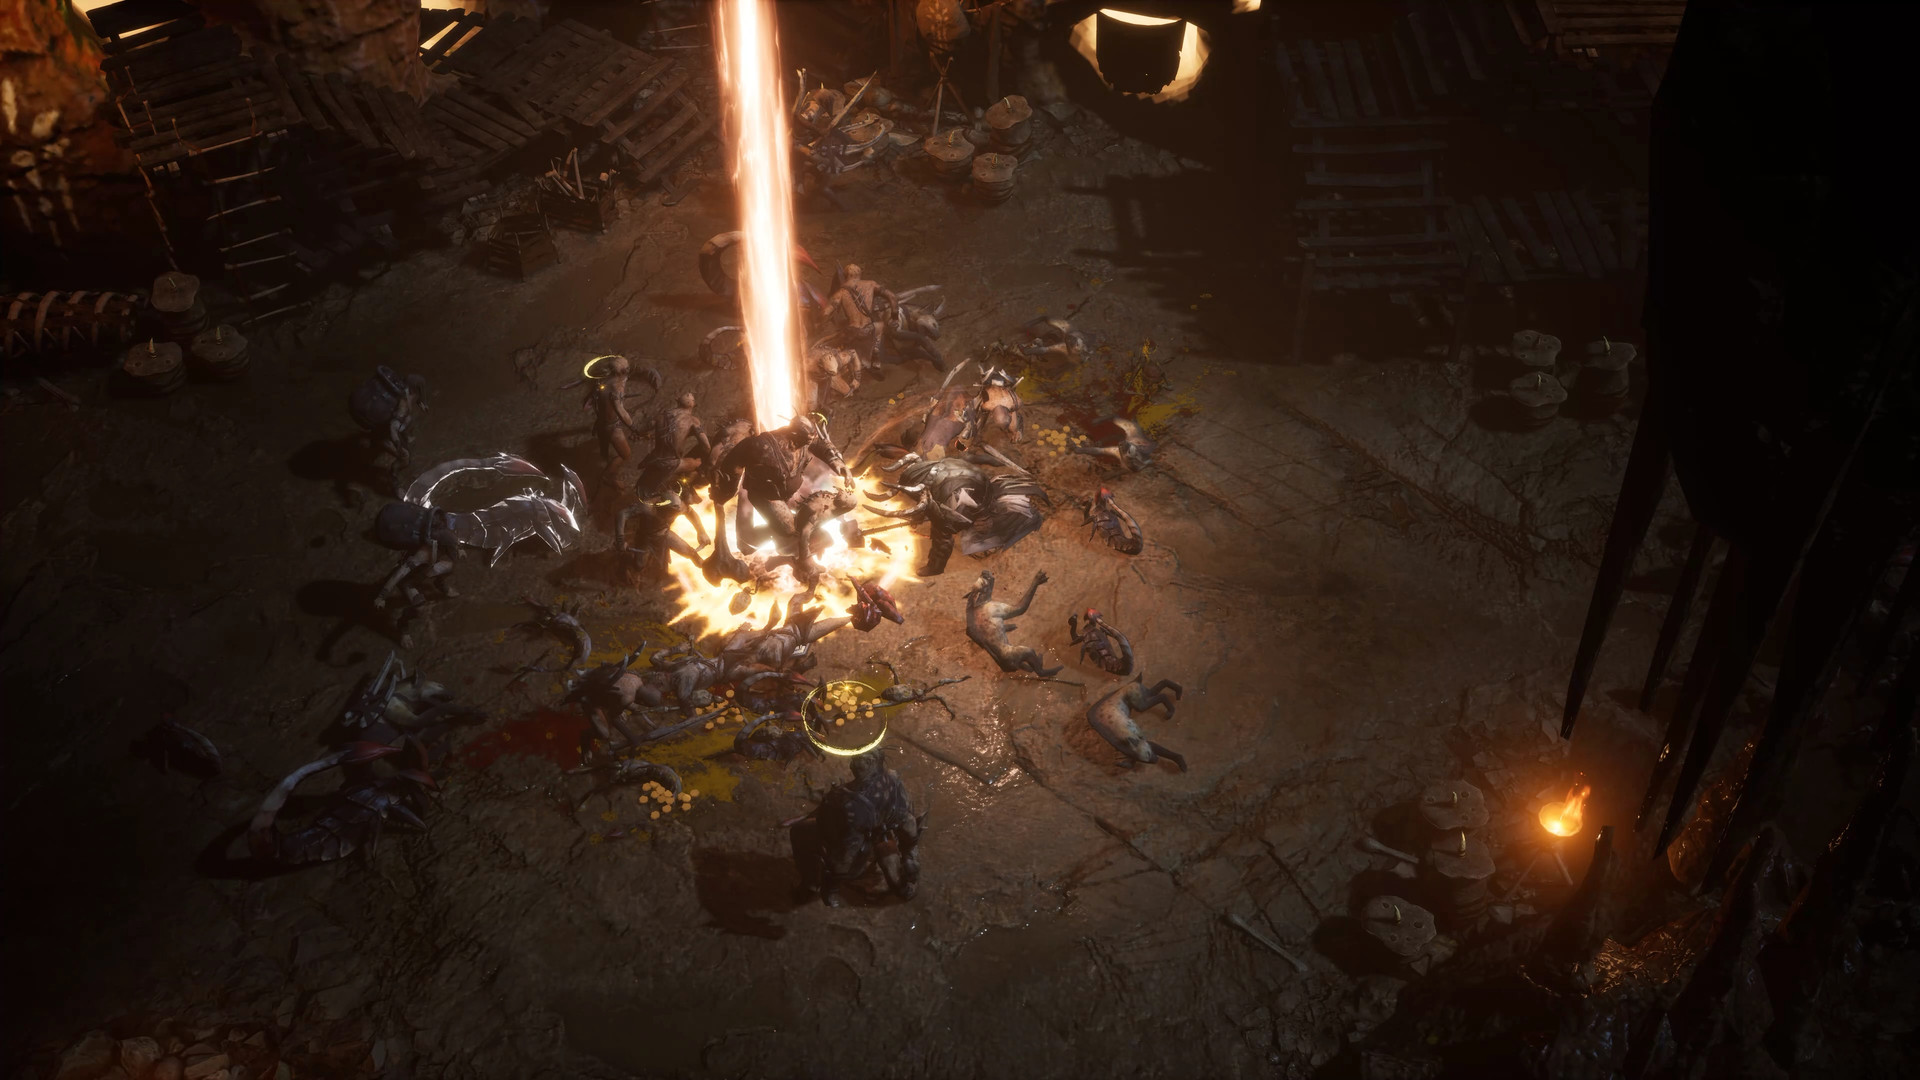 Diablo-like UNDECEMBER could be your next RPG addiction